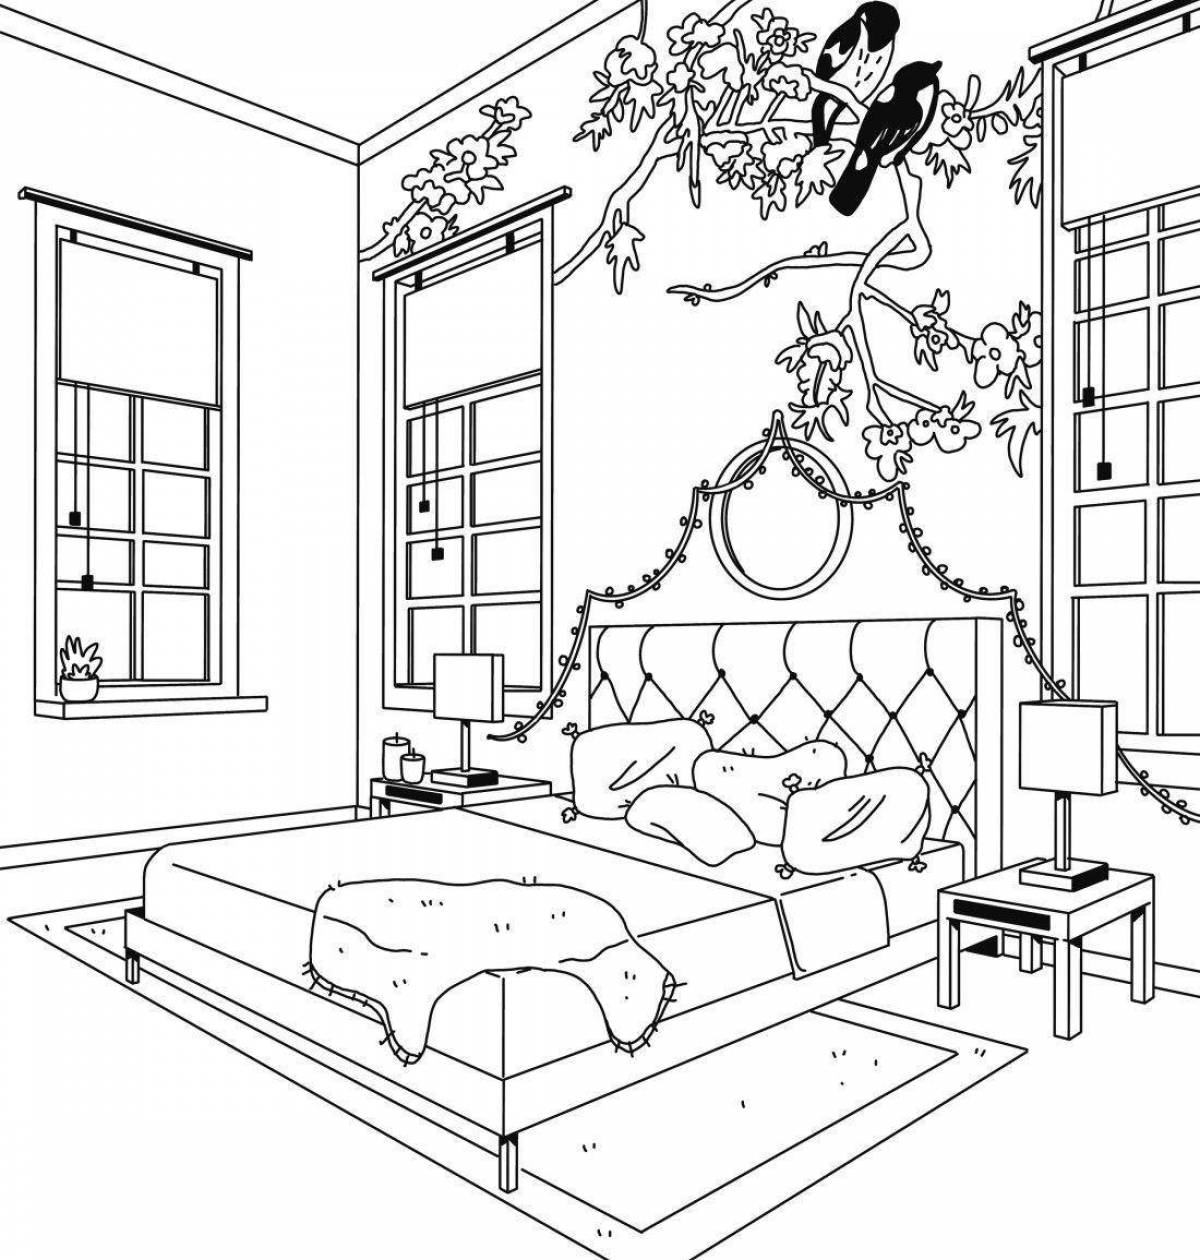 Radiant girl's room coloring page